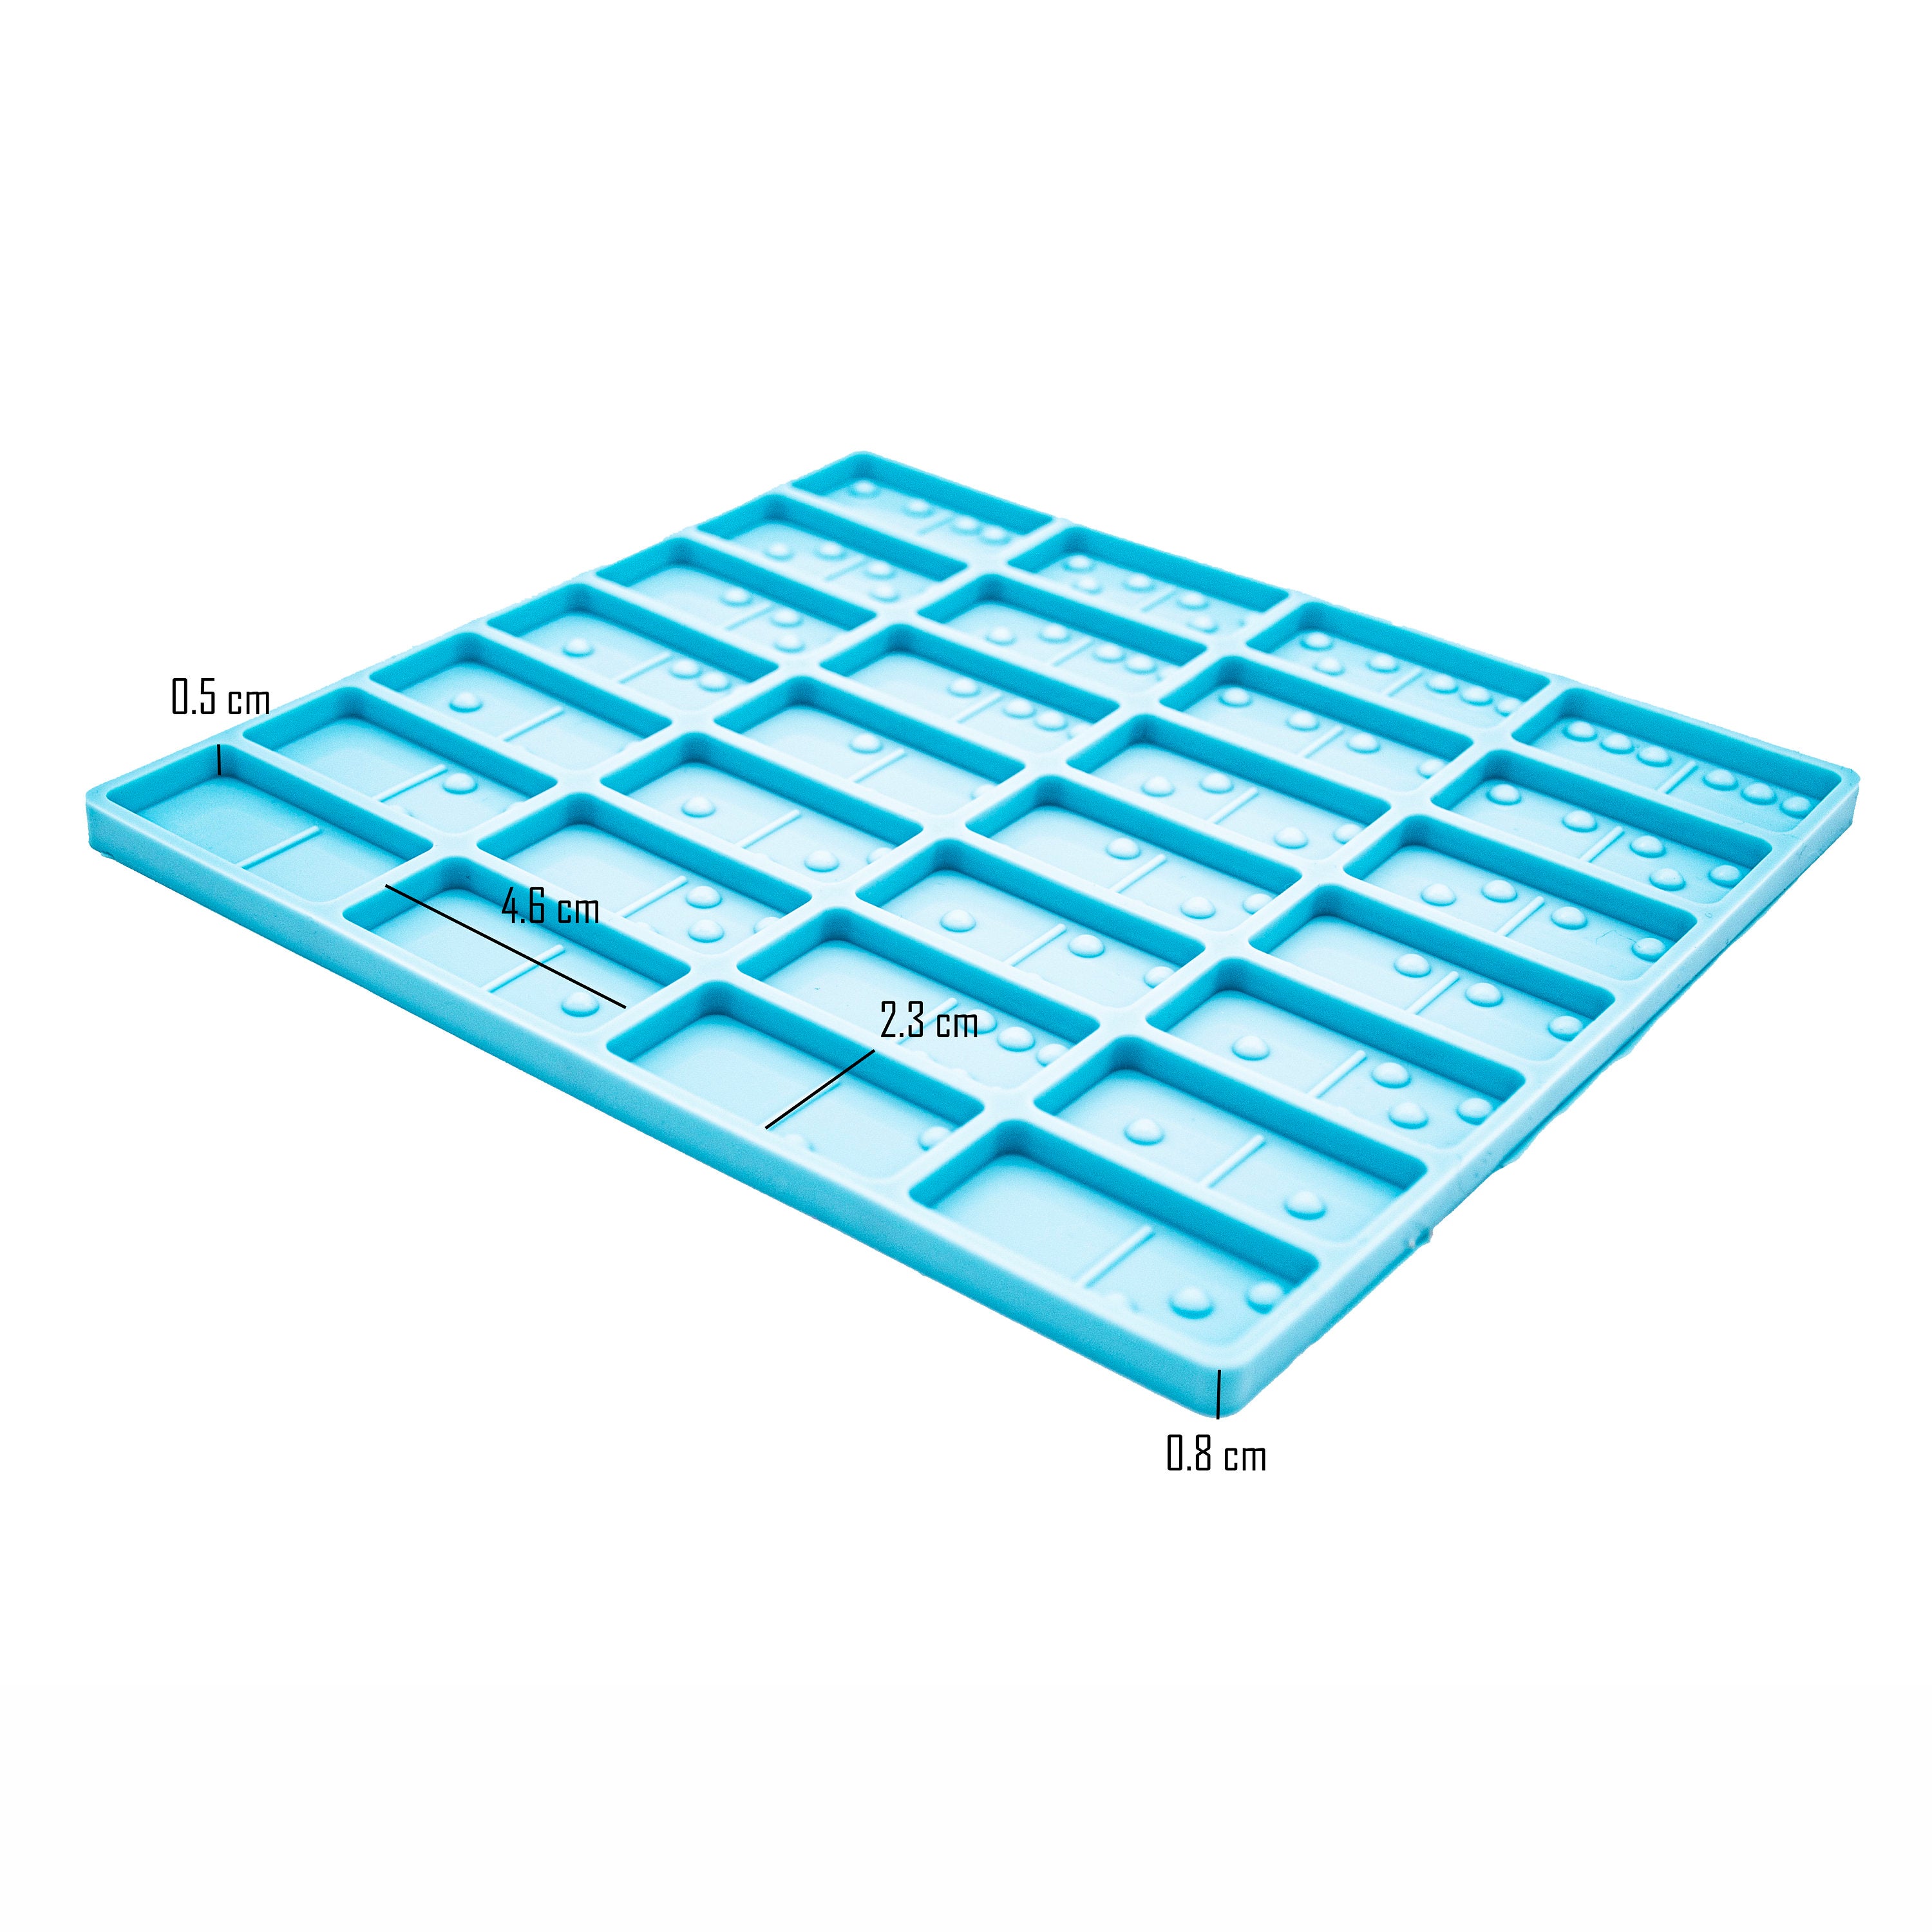 Domino Tray - Silicone Mold for Resin Crafts